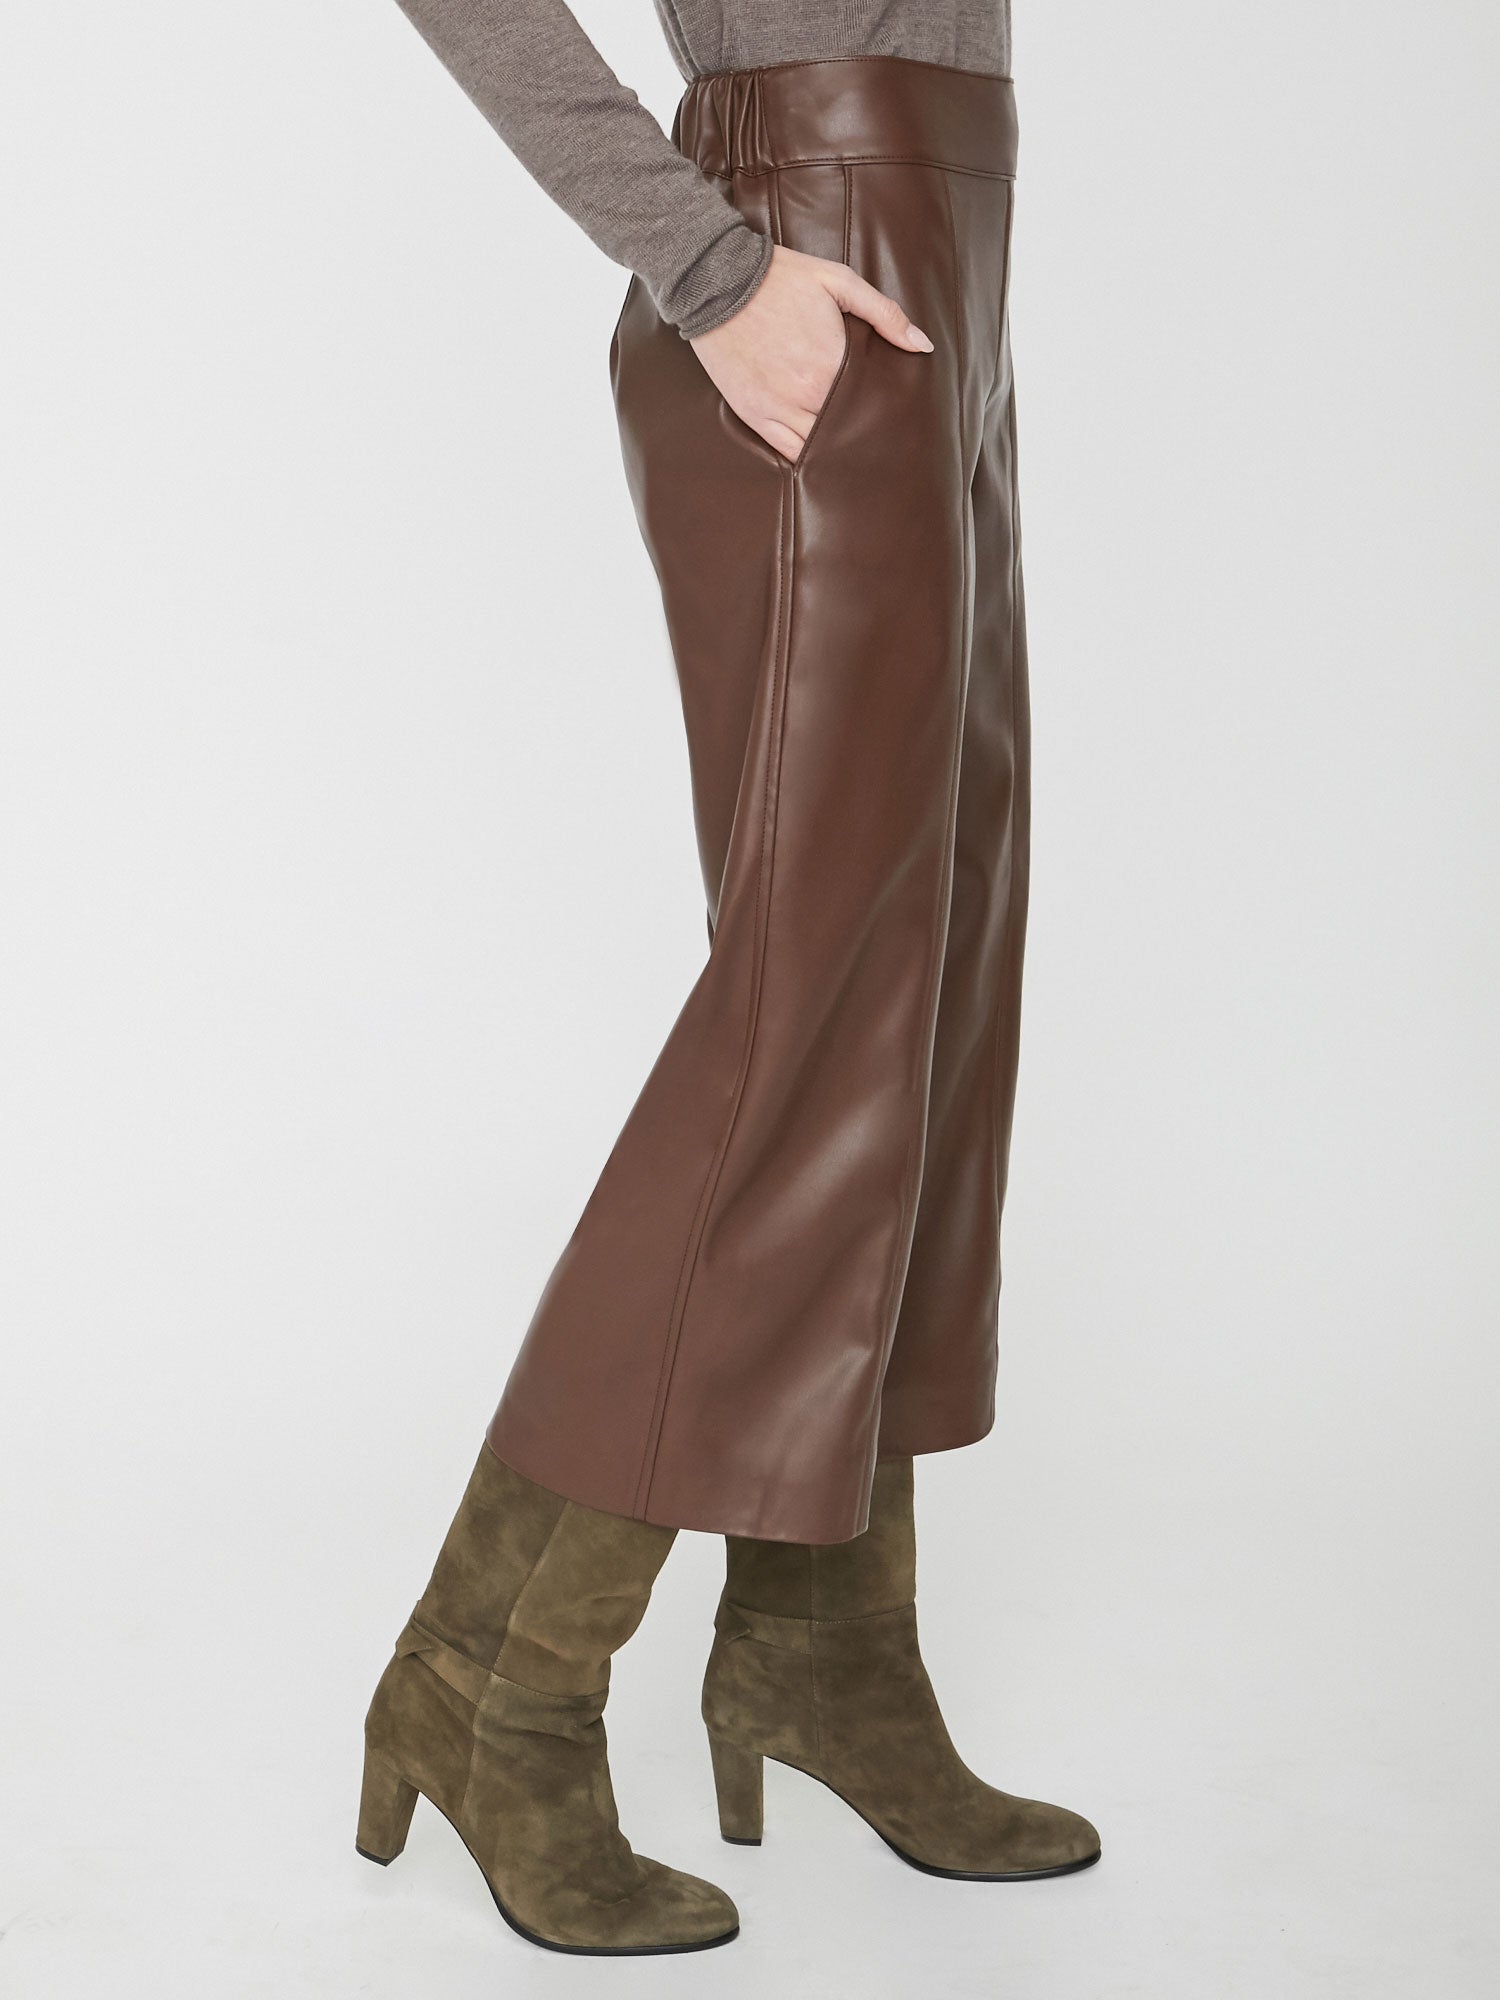 Frida cropped brown vegan leather pant side view